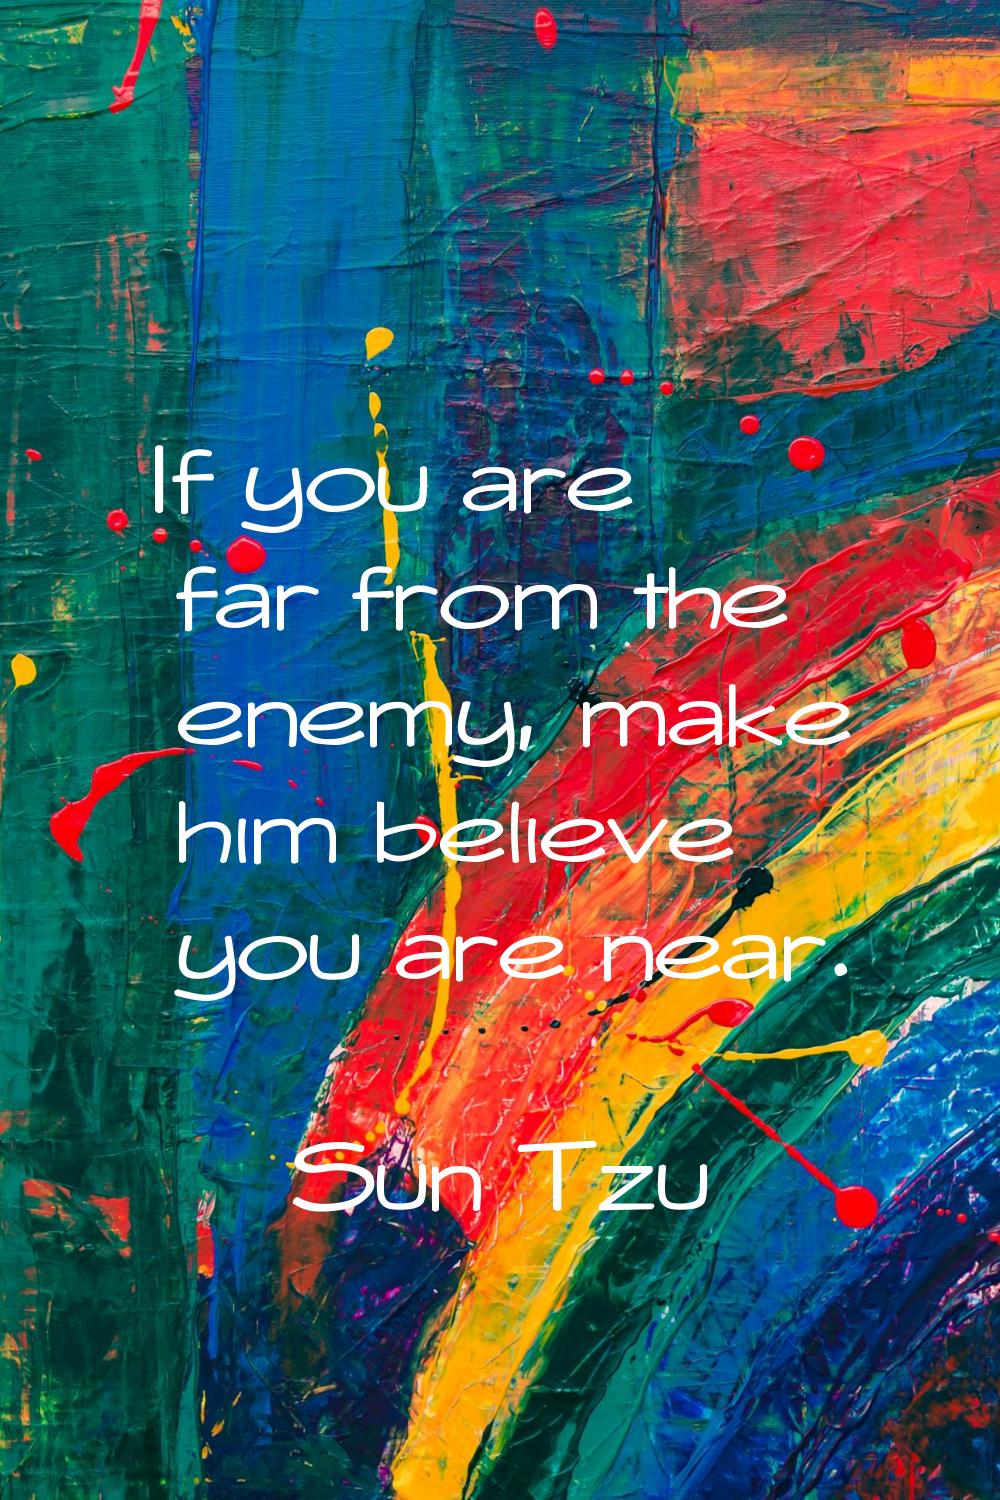 If you are far from the enemy, make him believe you are near.